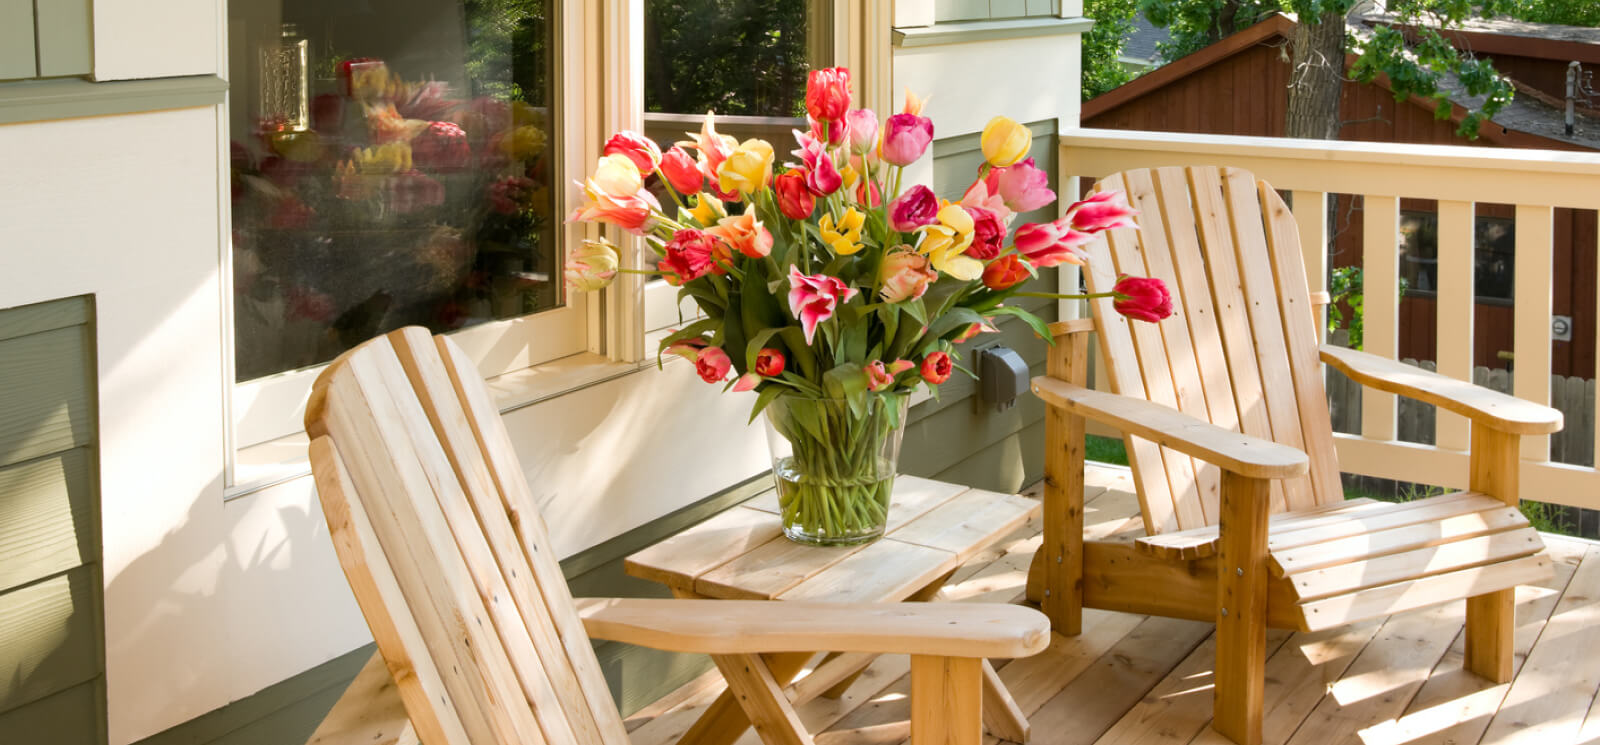 Wooden chairs on a patio with a vase of flowers